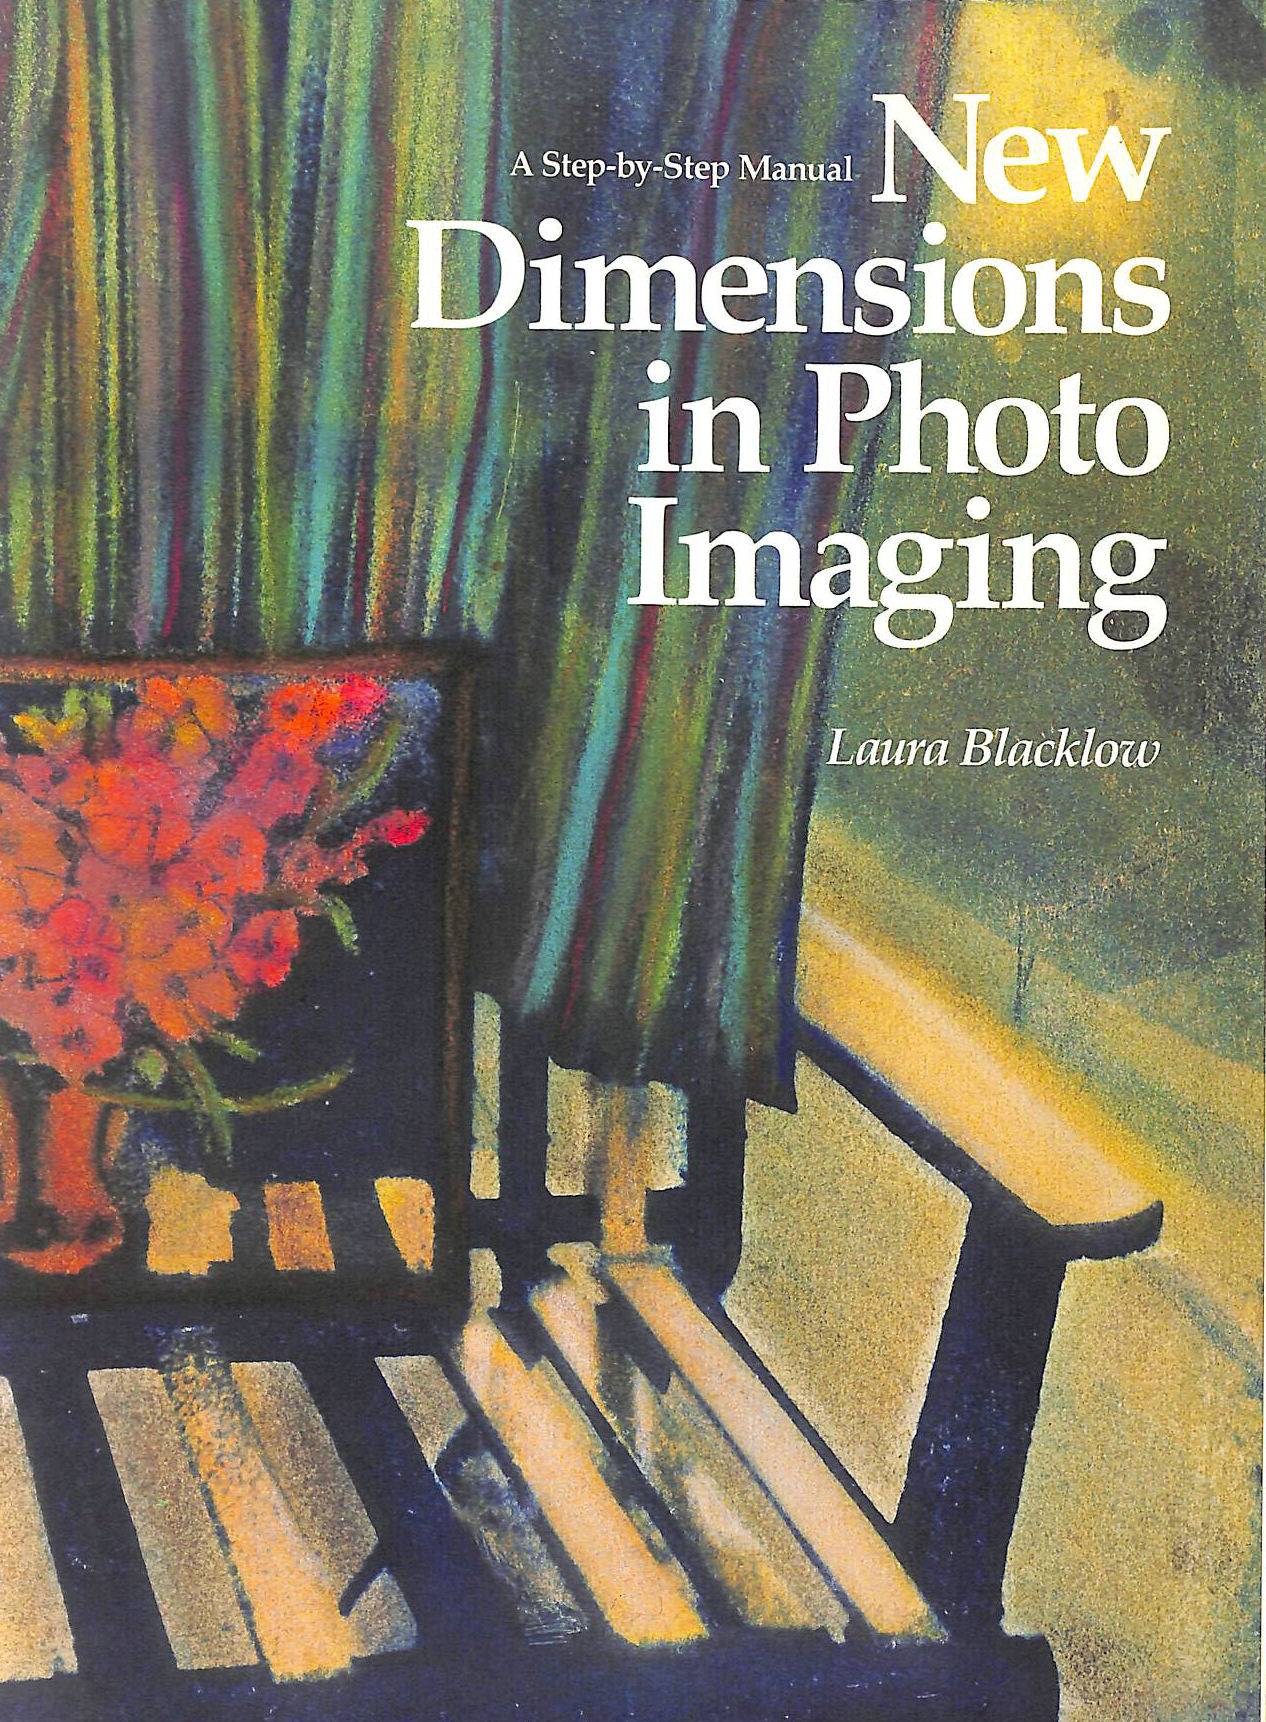 LAURA BLACKLOW - New Dimensions in Photo Imaging: A Step-by-step Manual